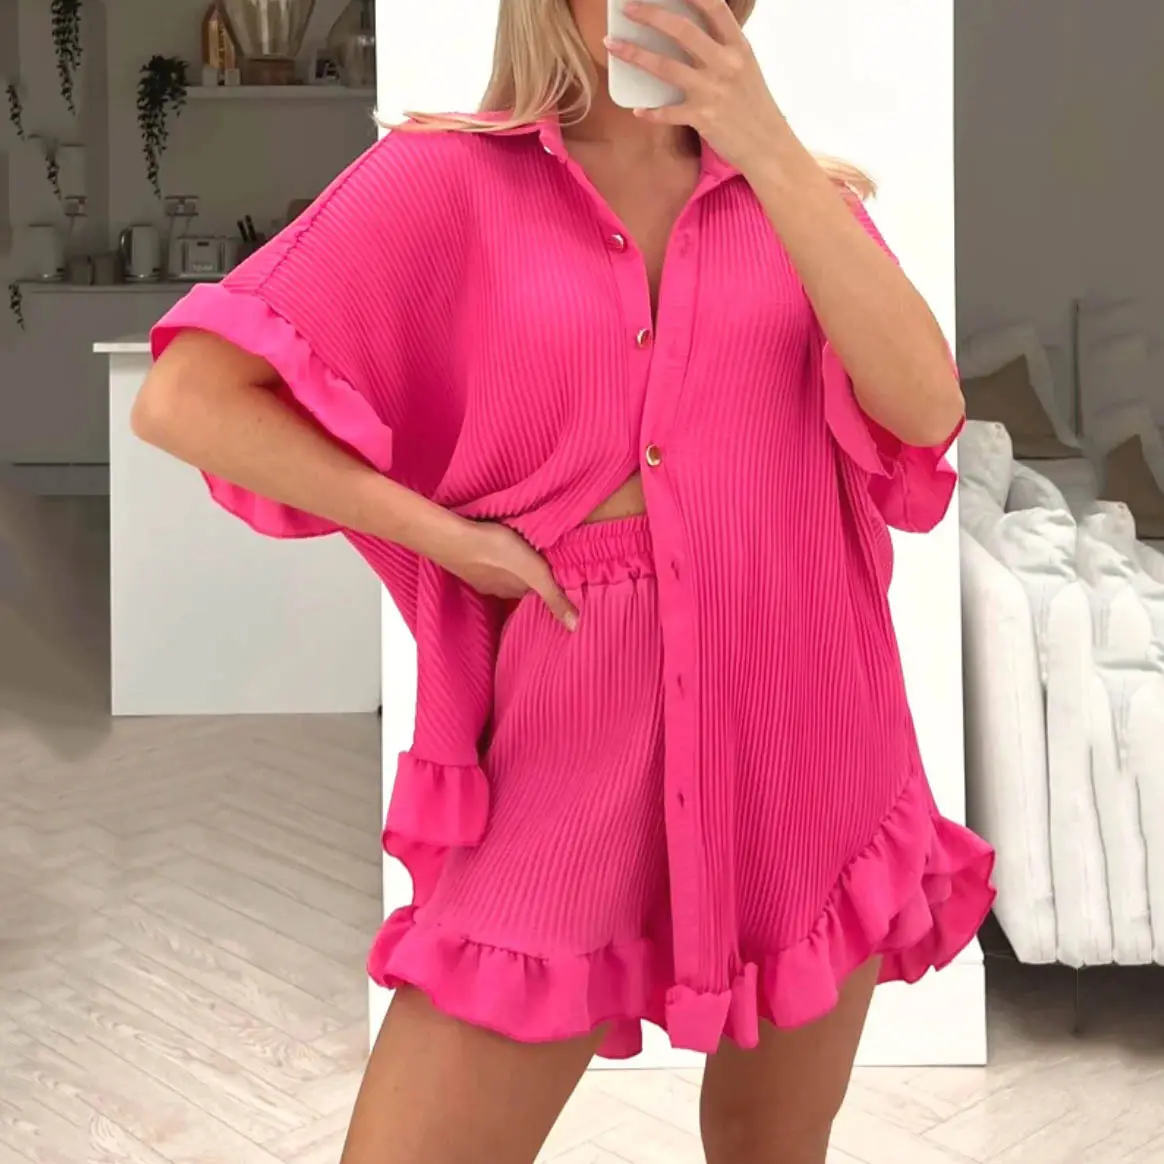 Enyami Summer Autumn Lounge Wear Bright Pleated Coords Ruffles Design Short Sleeves Shirt Blouse Shorts Plisse Two Piece Sets